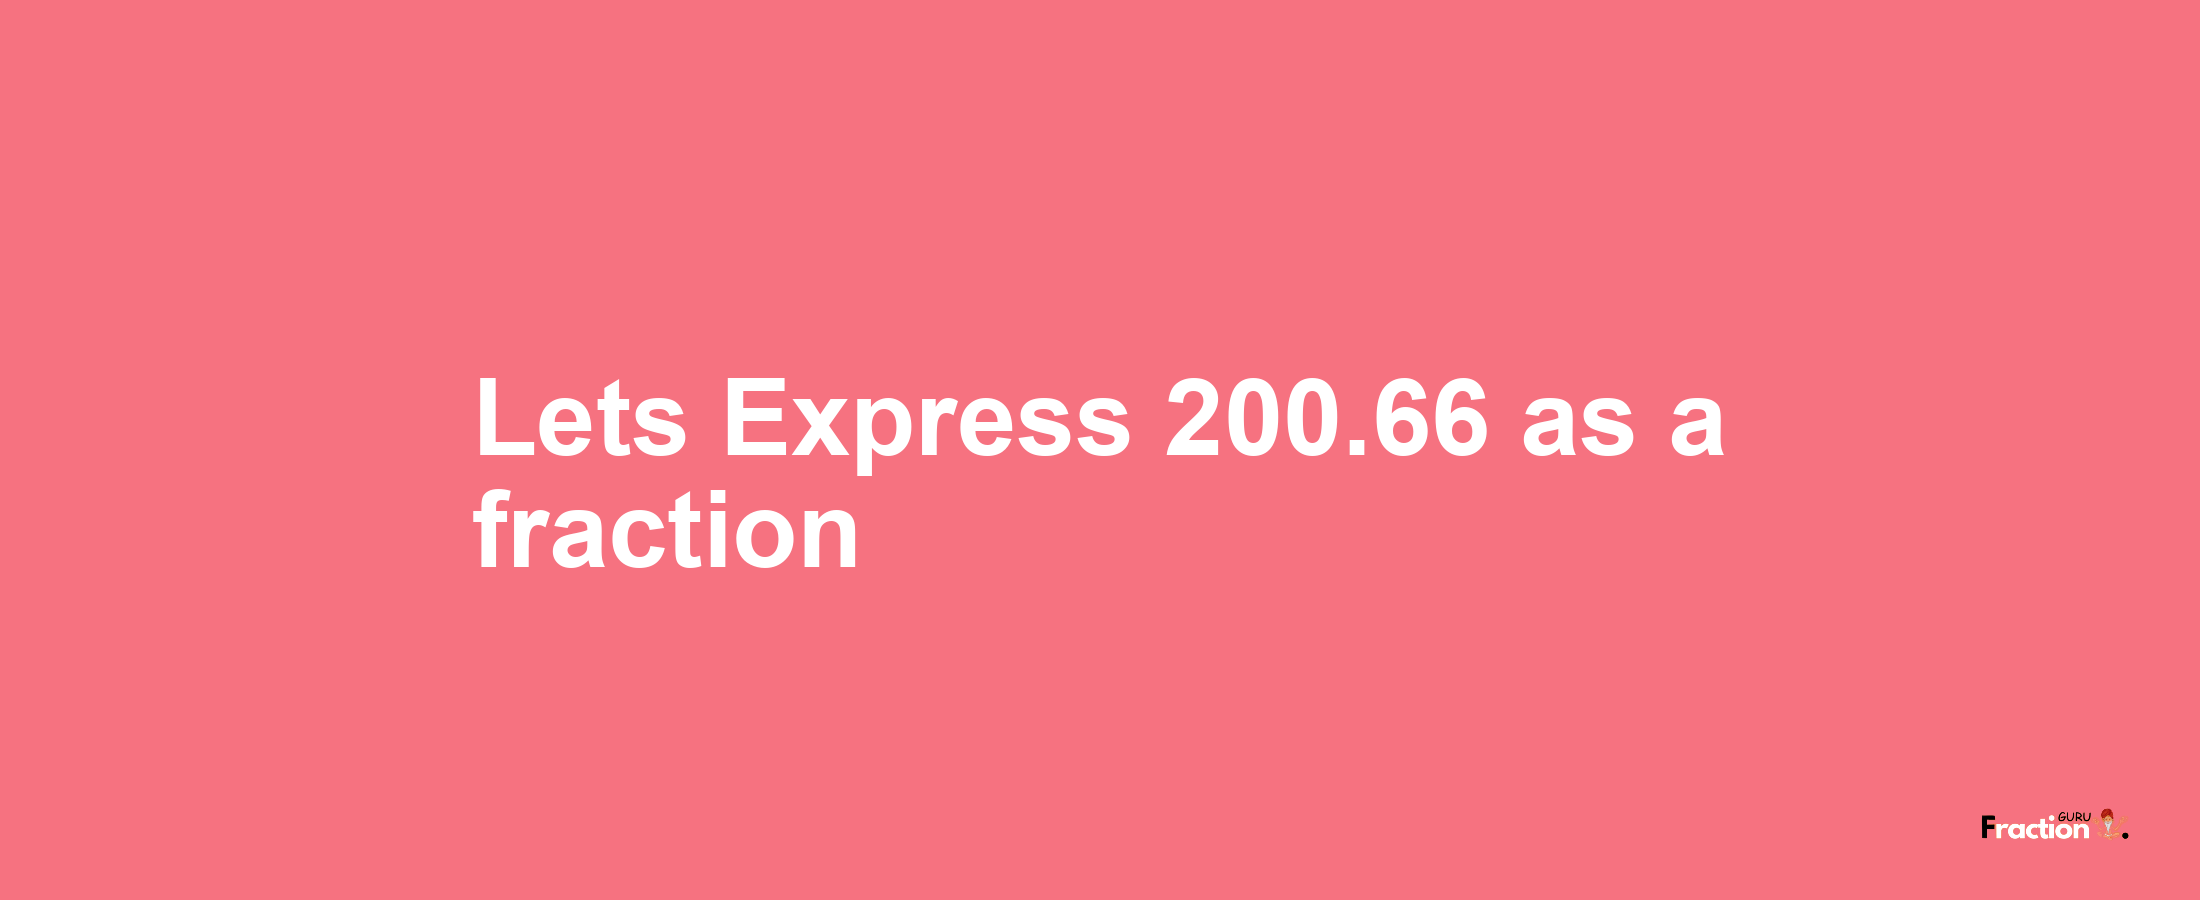 Lets Express 200.66 as afraction